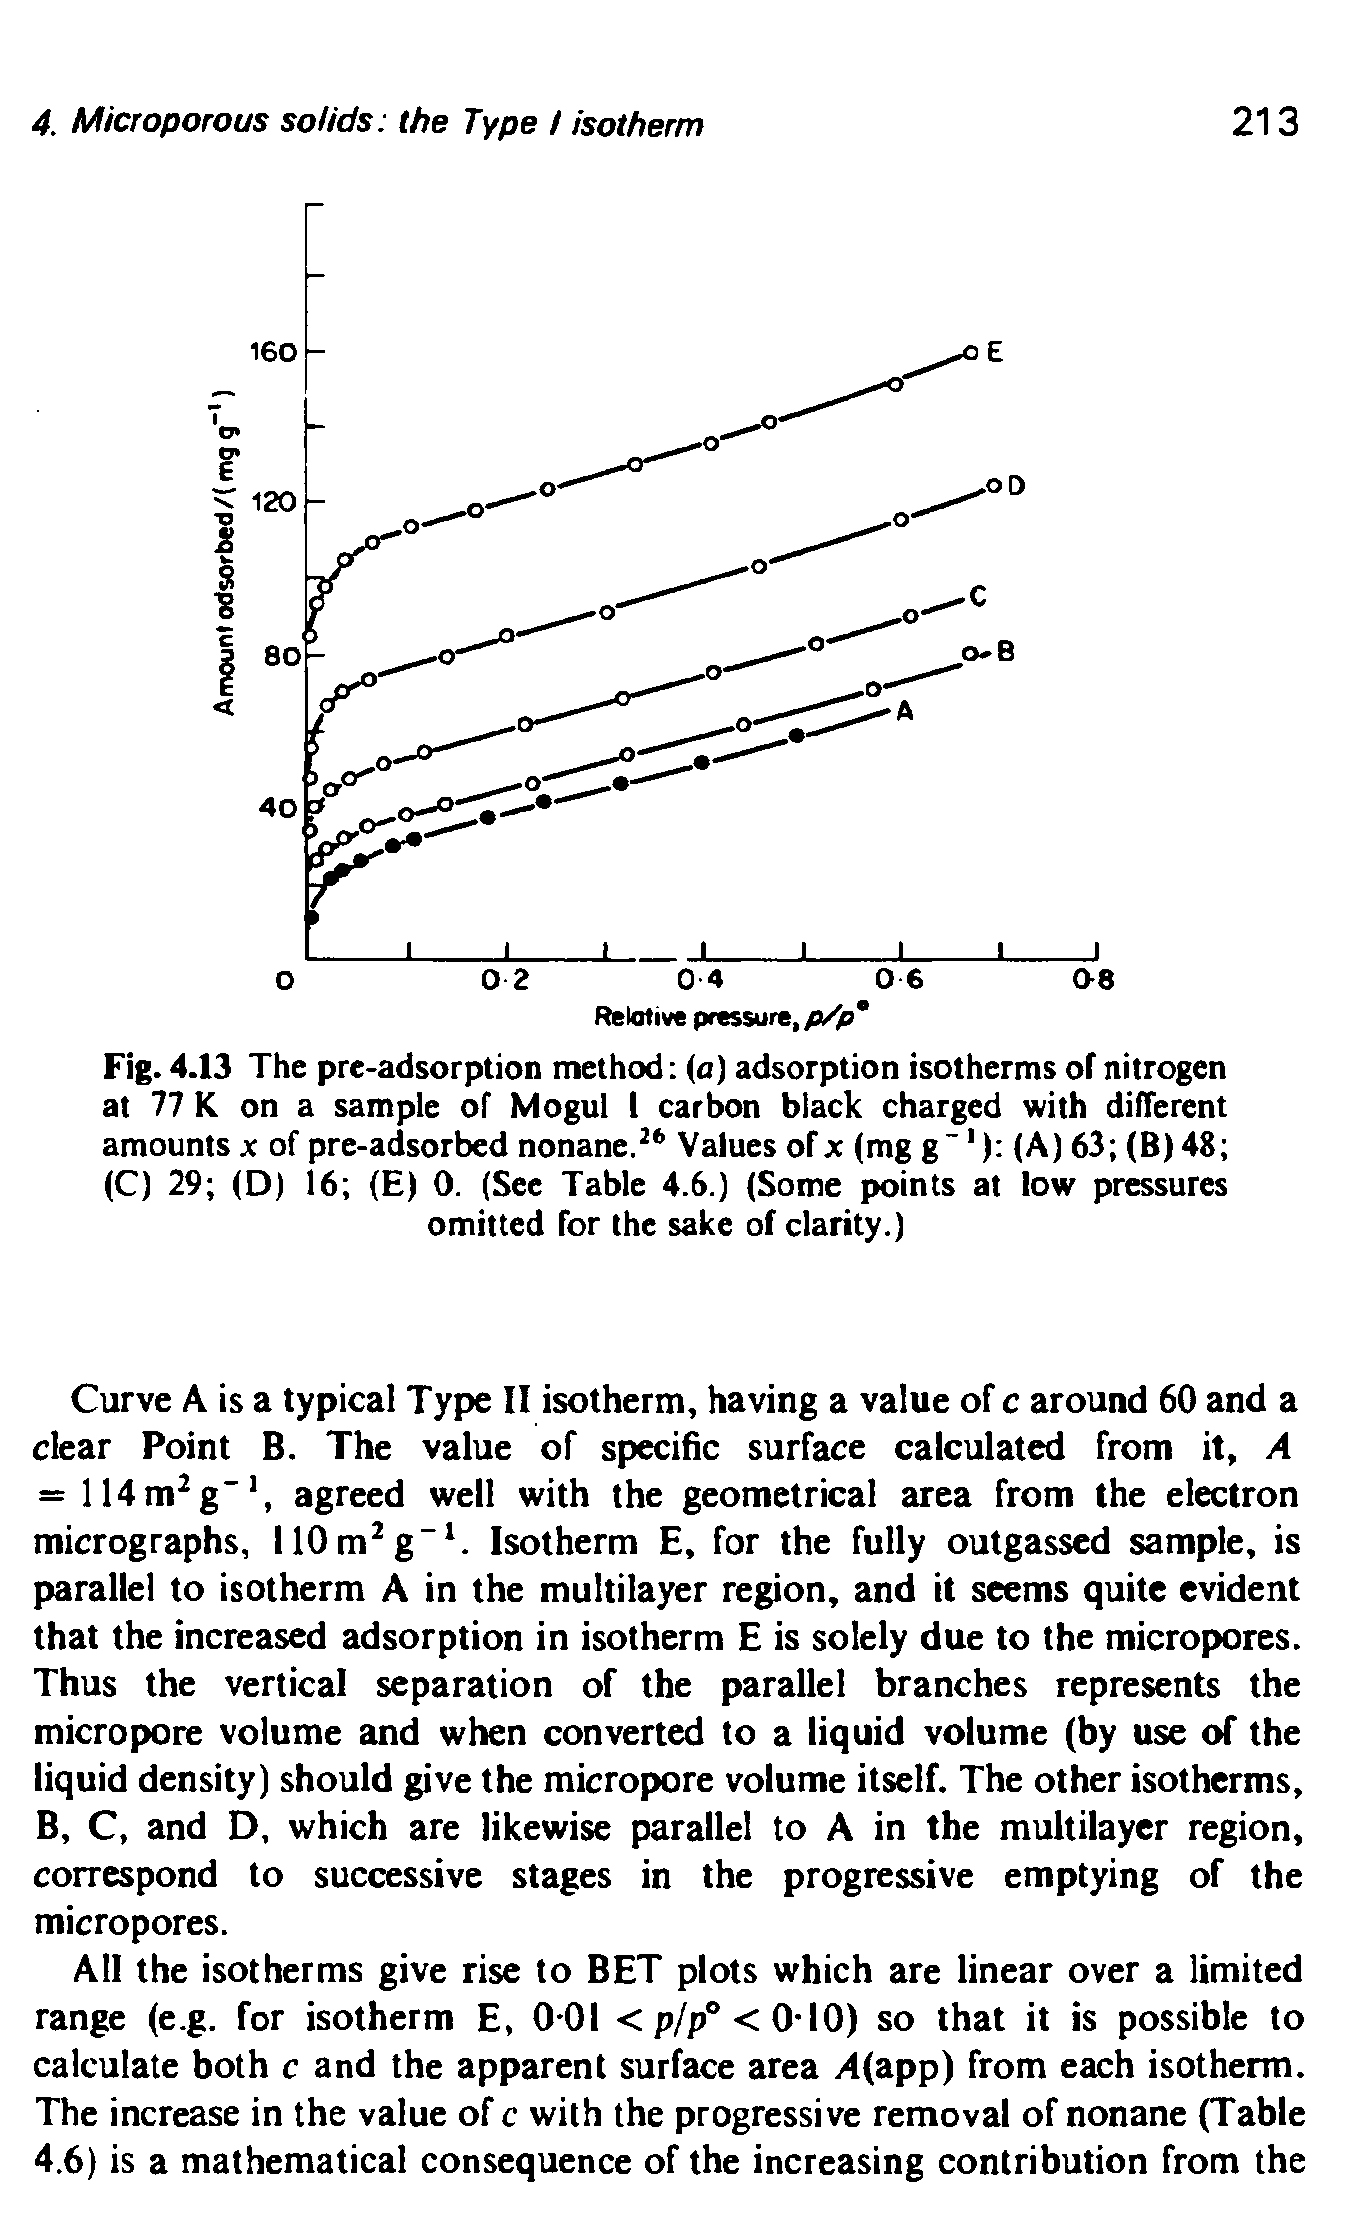 Fig. 4.13 The pre-adsorption method (a) adsorption isotherms of nitrogen at 77 K on a sample of Mogul I carbon black charged with different amounts x of pre-adsorbed nonane. Values ofx (mg g (A) 63 (B)48 (C) 29 (D) 16 (E) 0. (See Table 4.5.) (Some points at low pressures omitted for the sake of clarity.)...